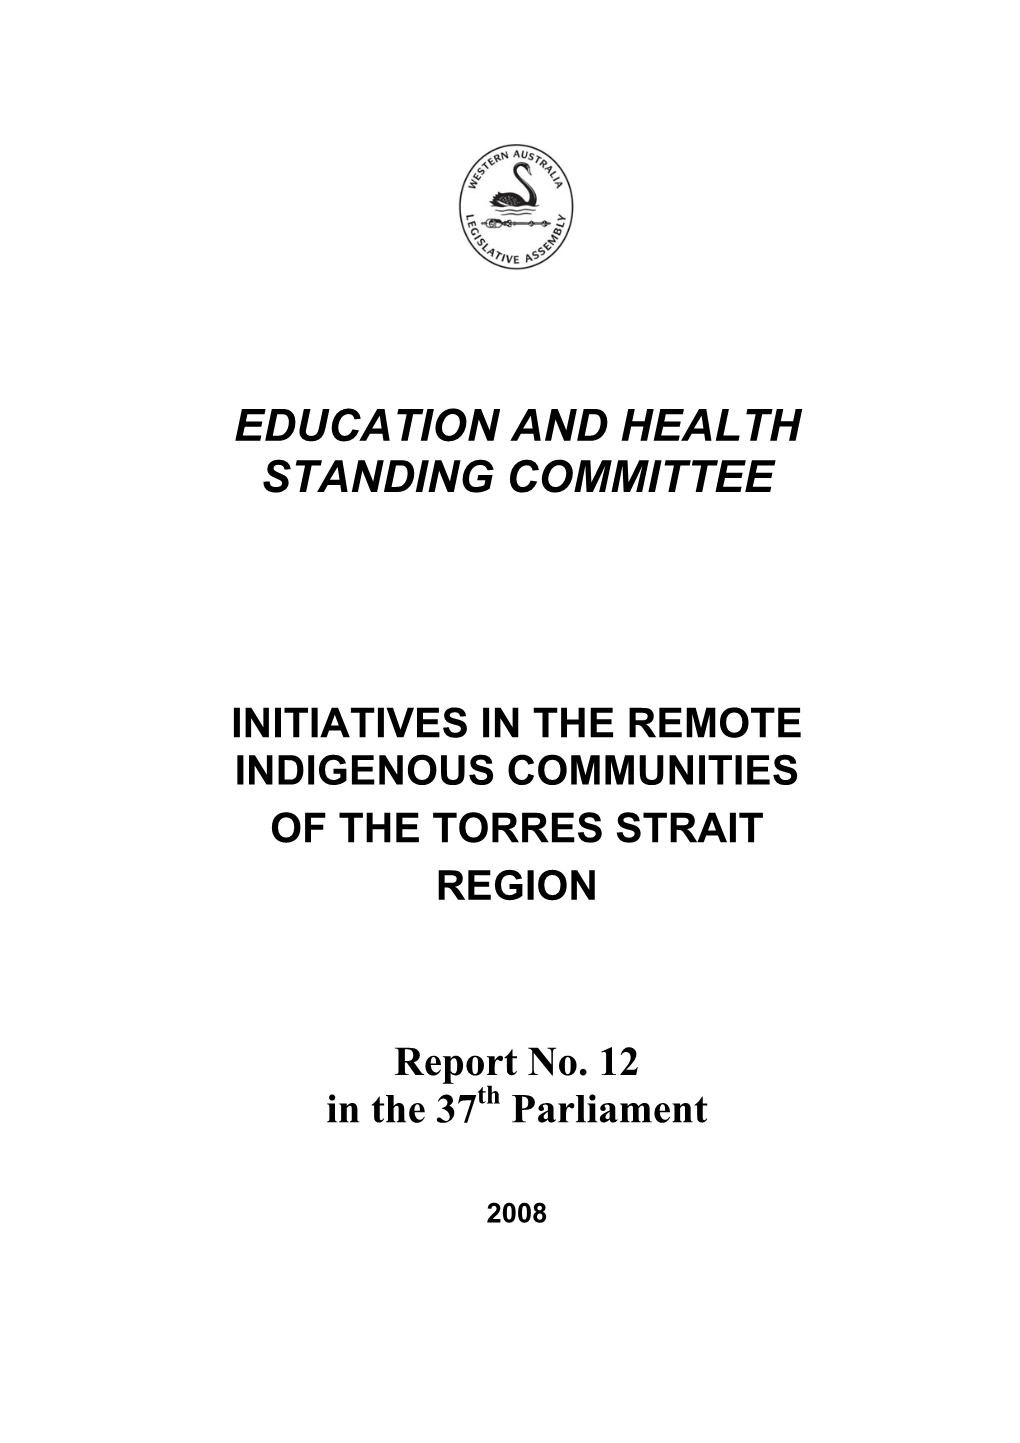 Initiatives in the Remote Indigenous Communities of the Torres Strait Region